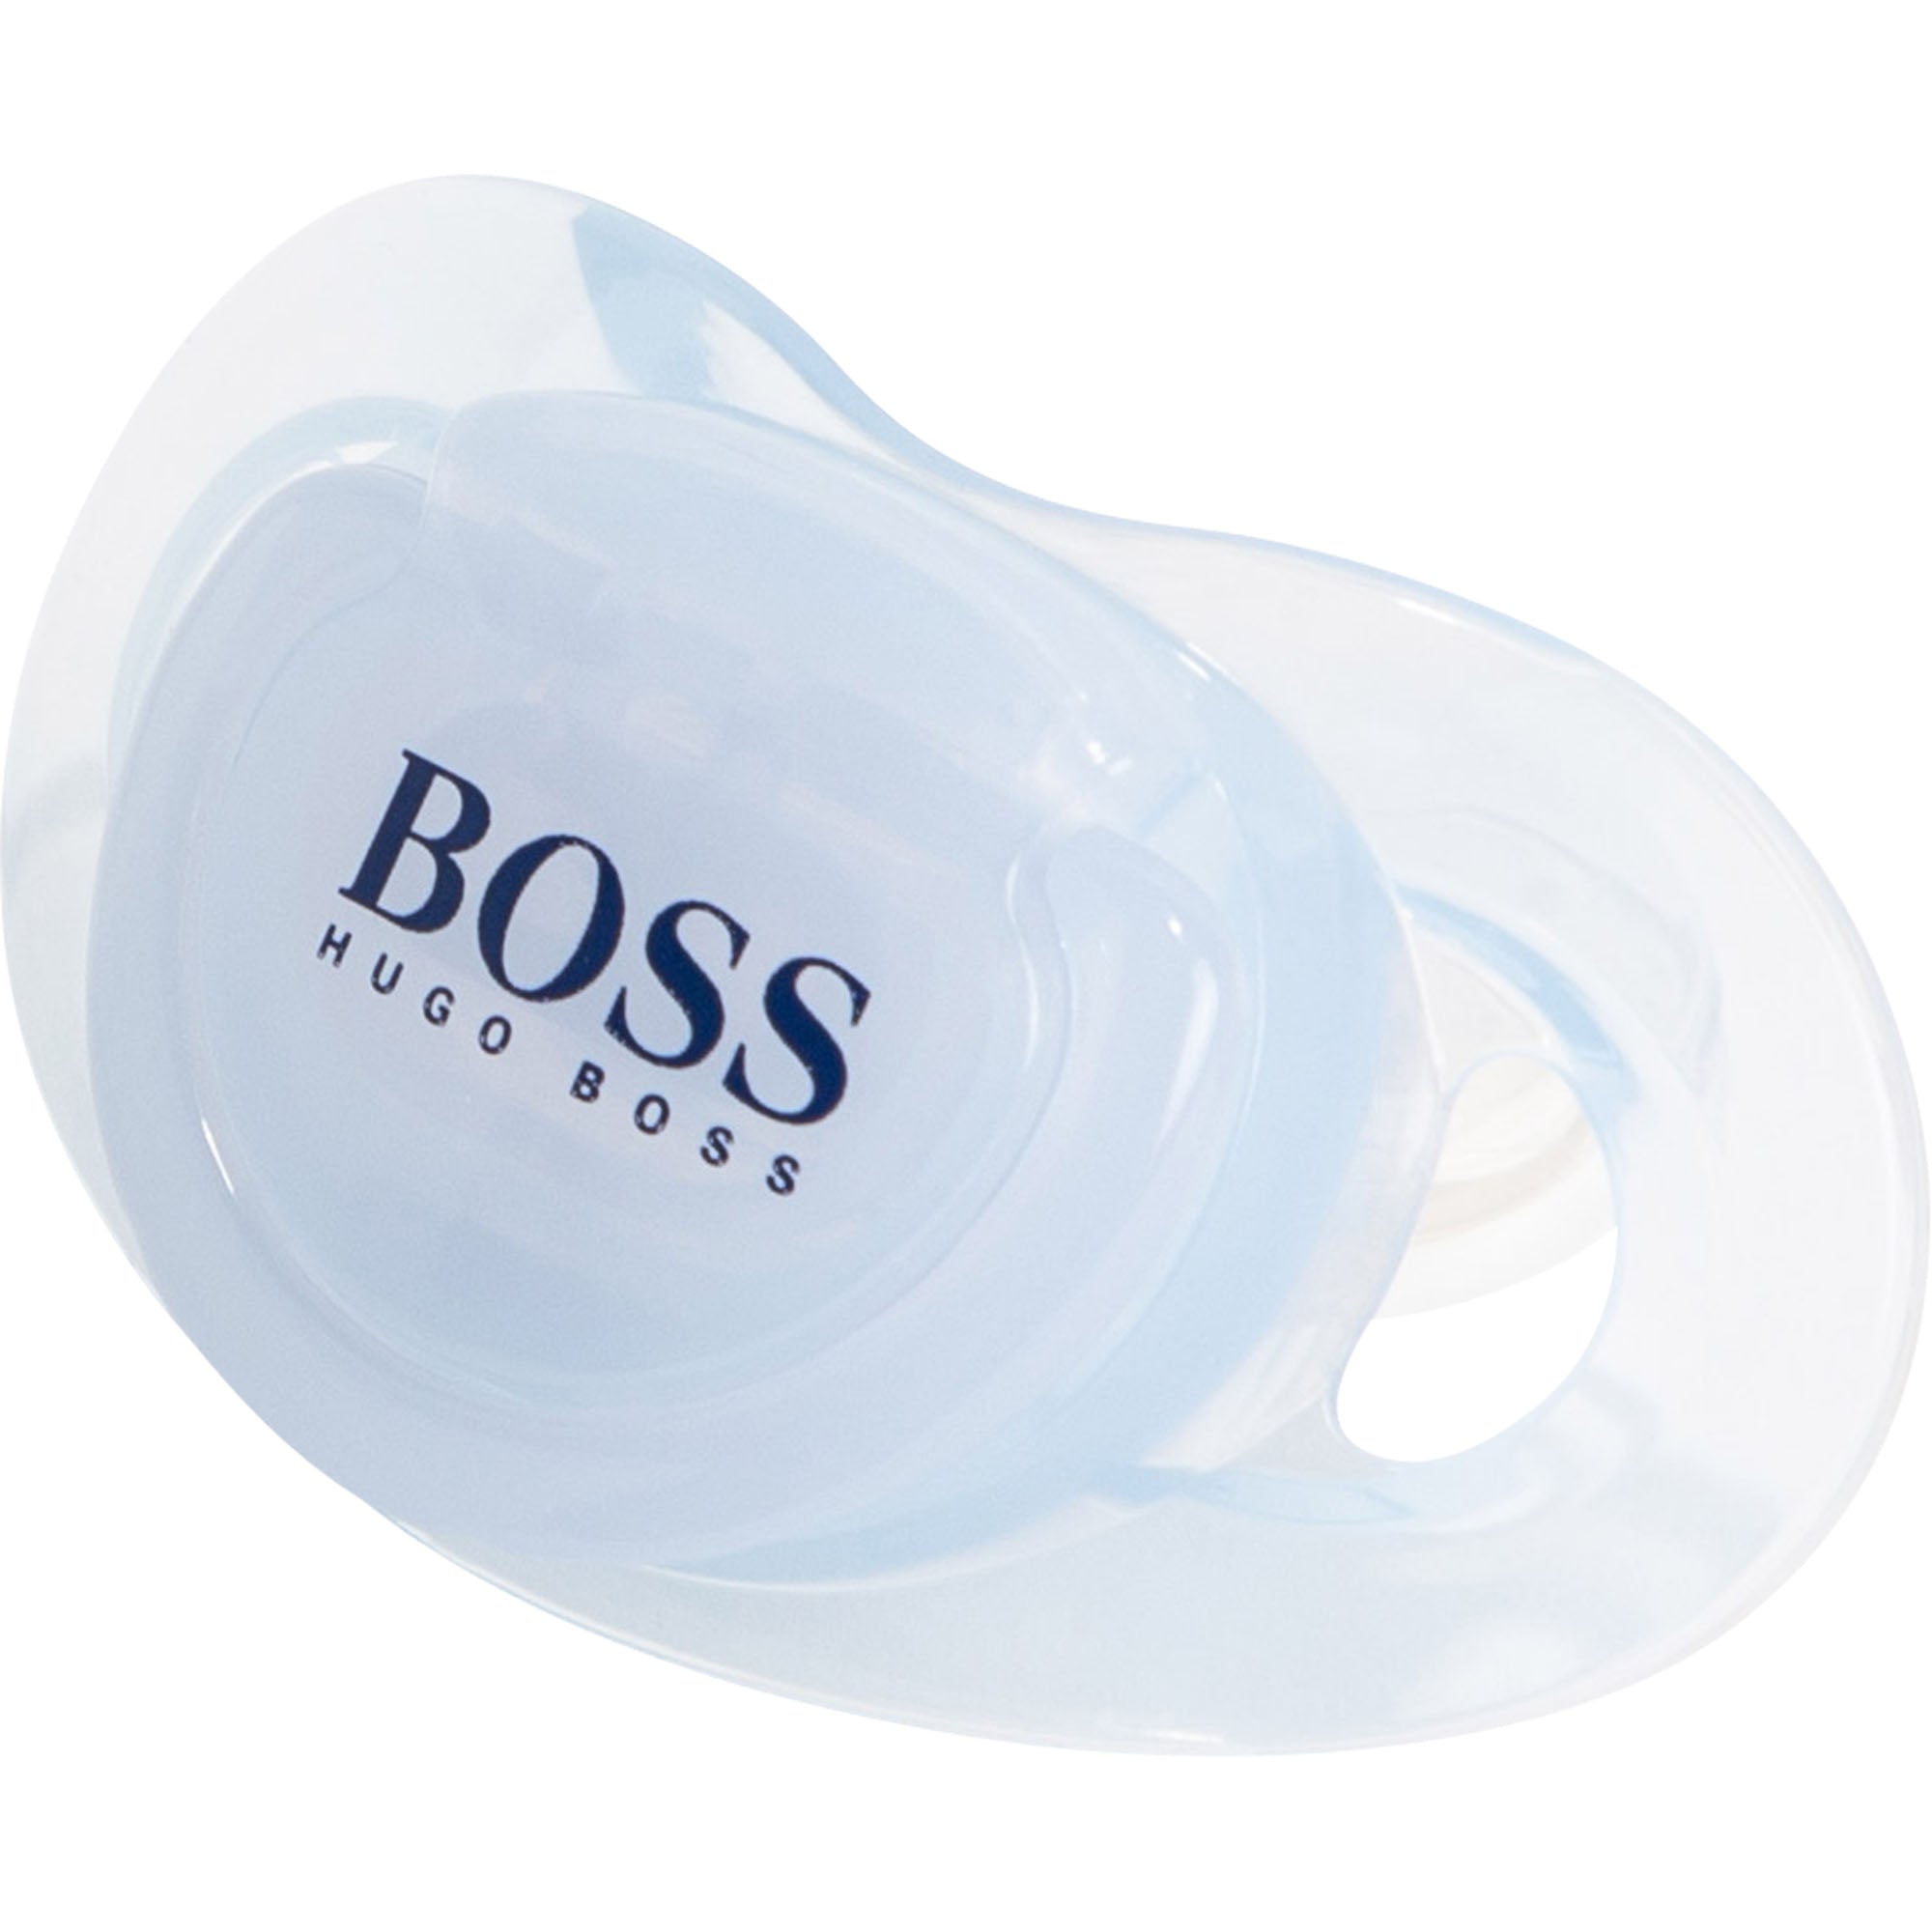 Baby Blue Pacifier